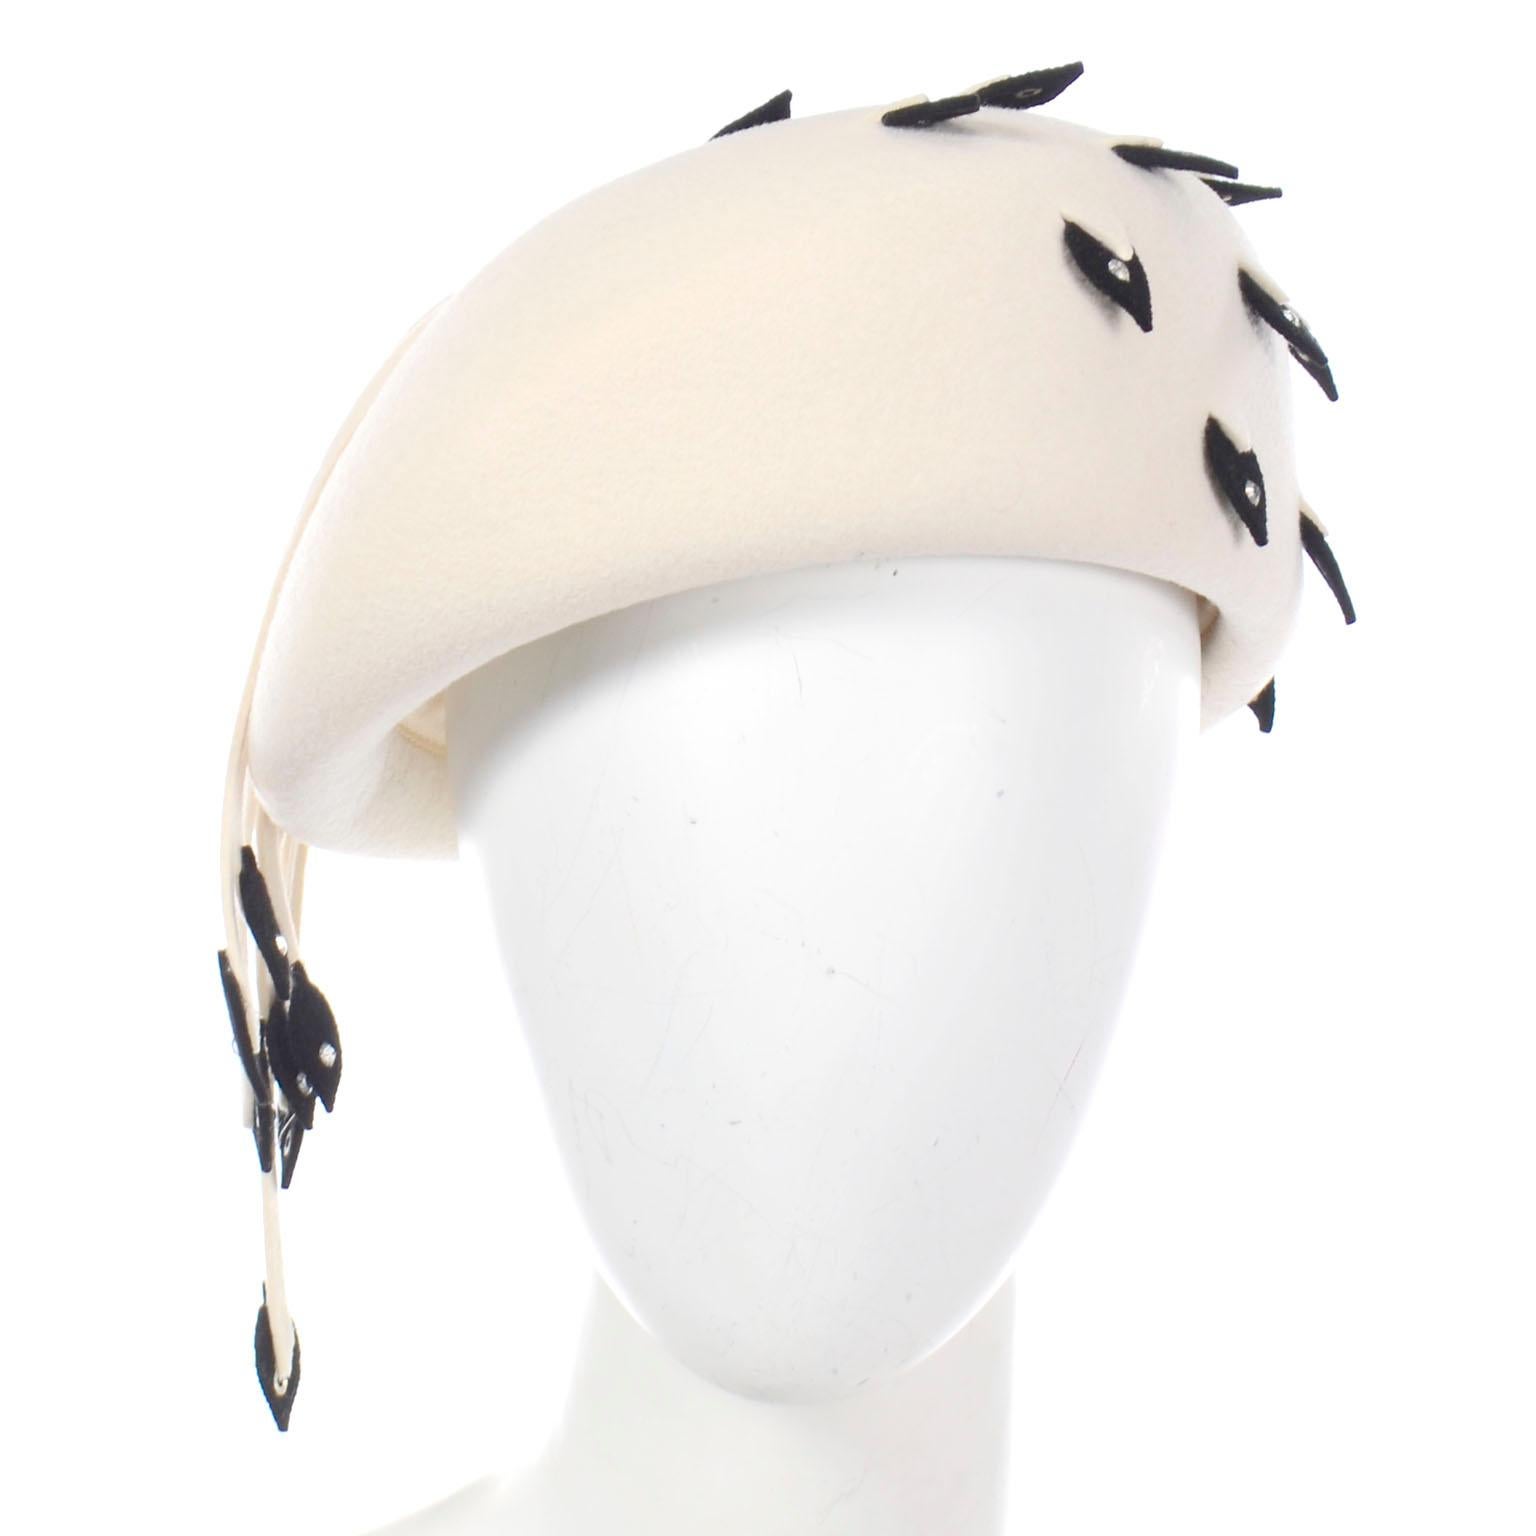 We love vintage Jack McConnell hats and this unique vintage beret is such a fun hat to add to your collection! This beautiful fascinator winter white / ivory wool beret style hat has unique black leaf shaped appliques with rhinestones and strips of